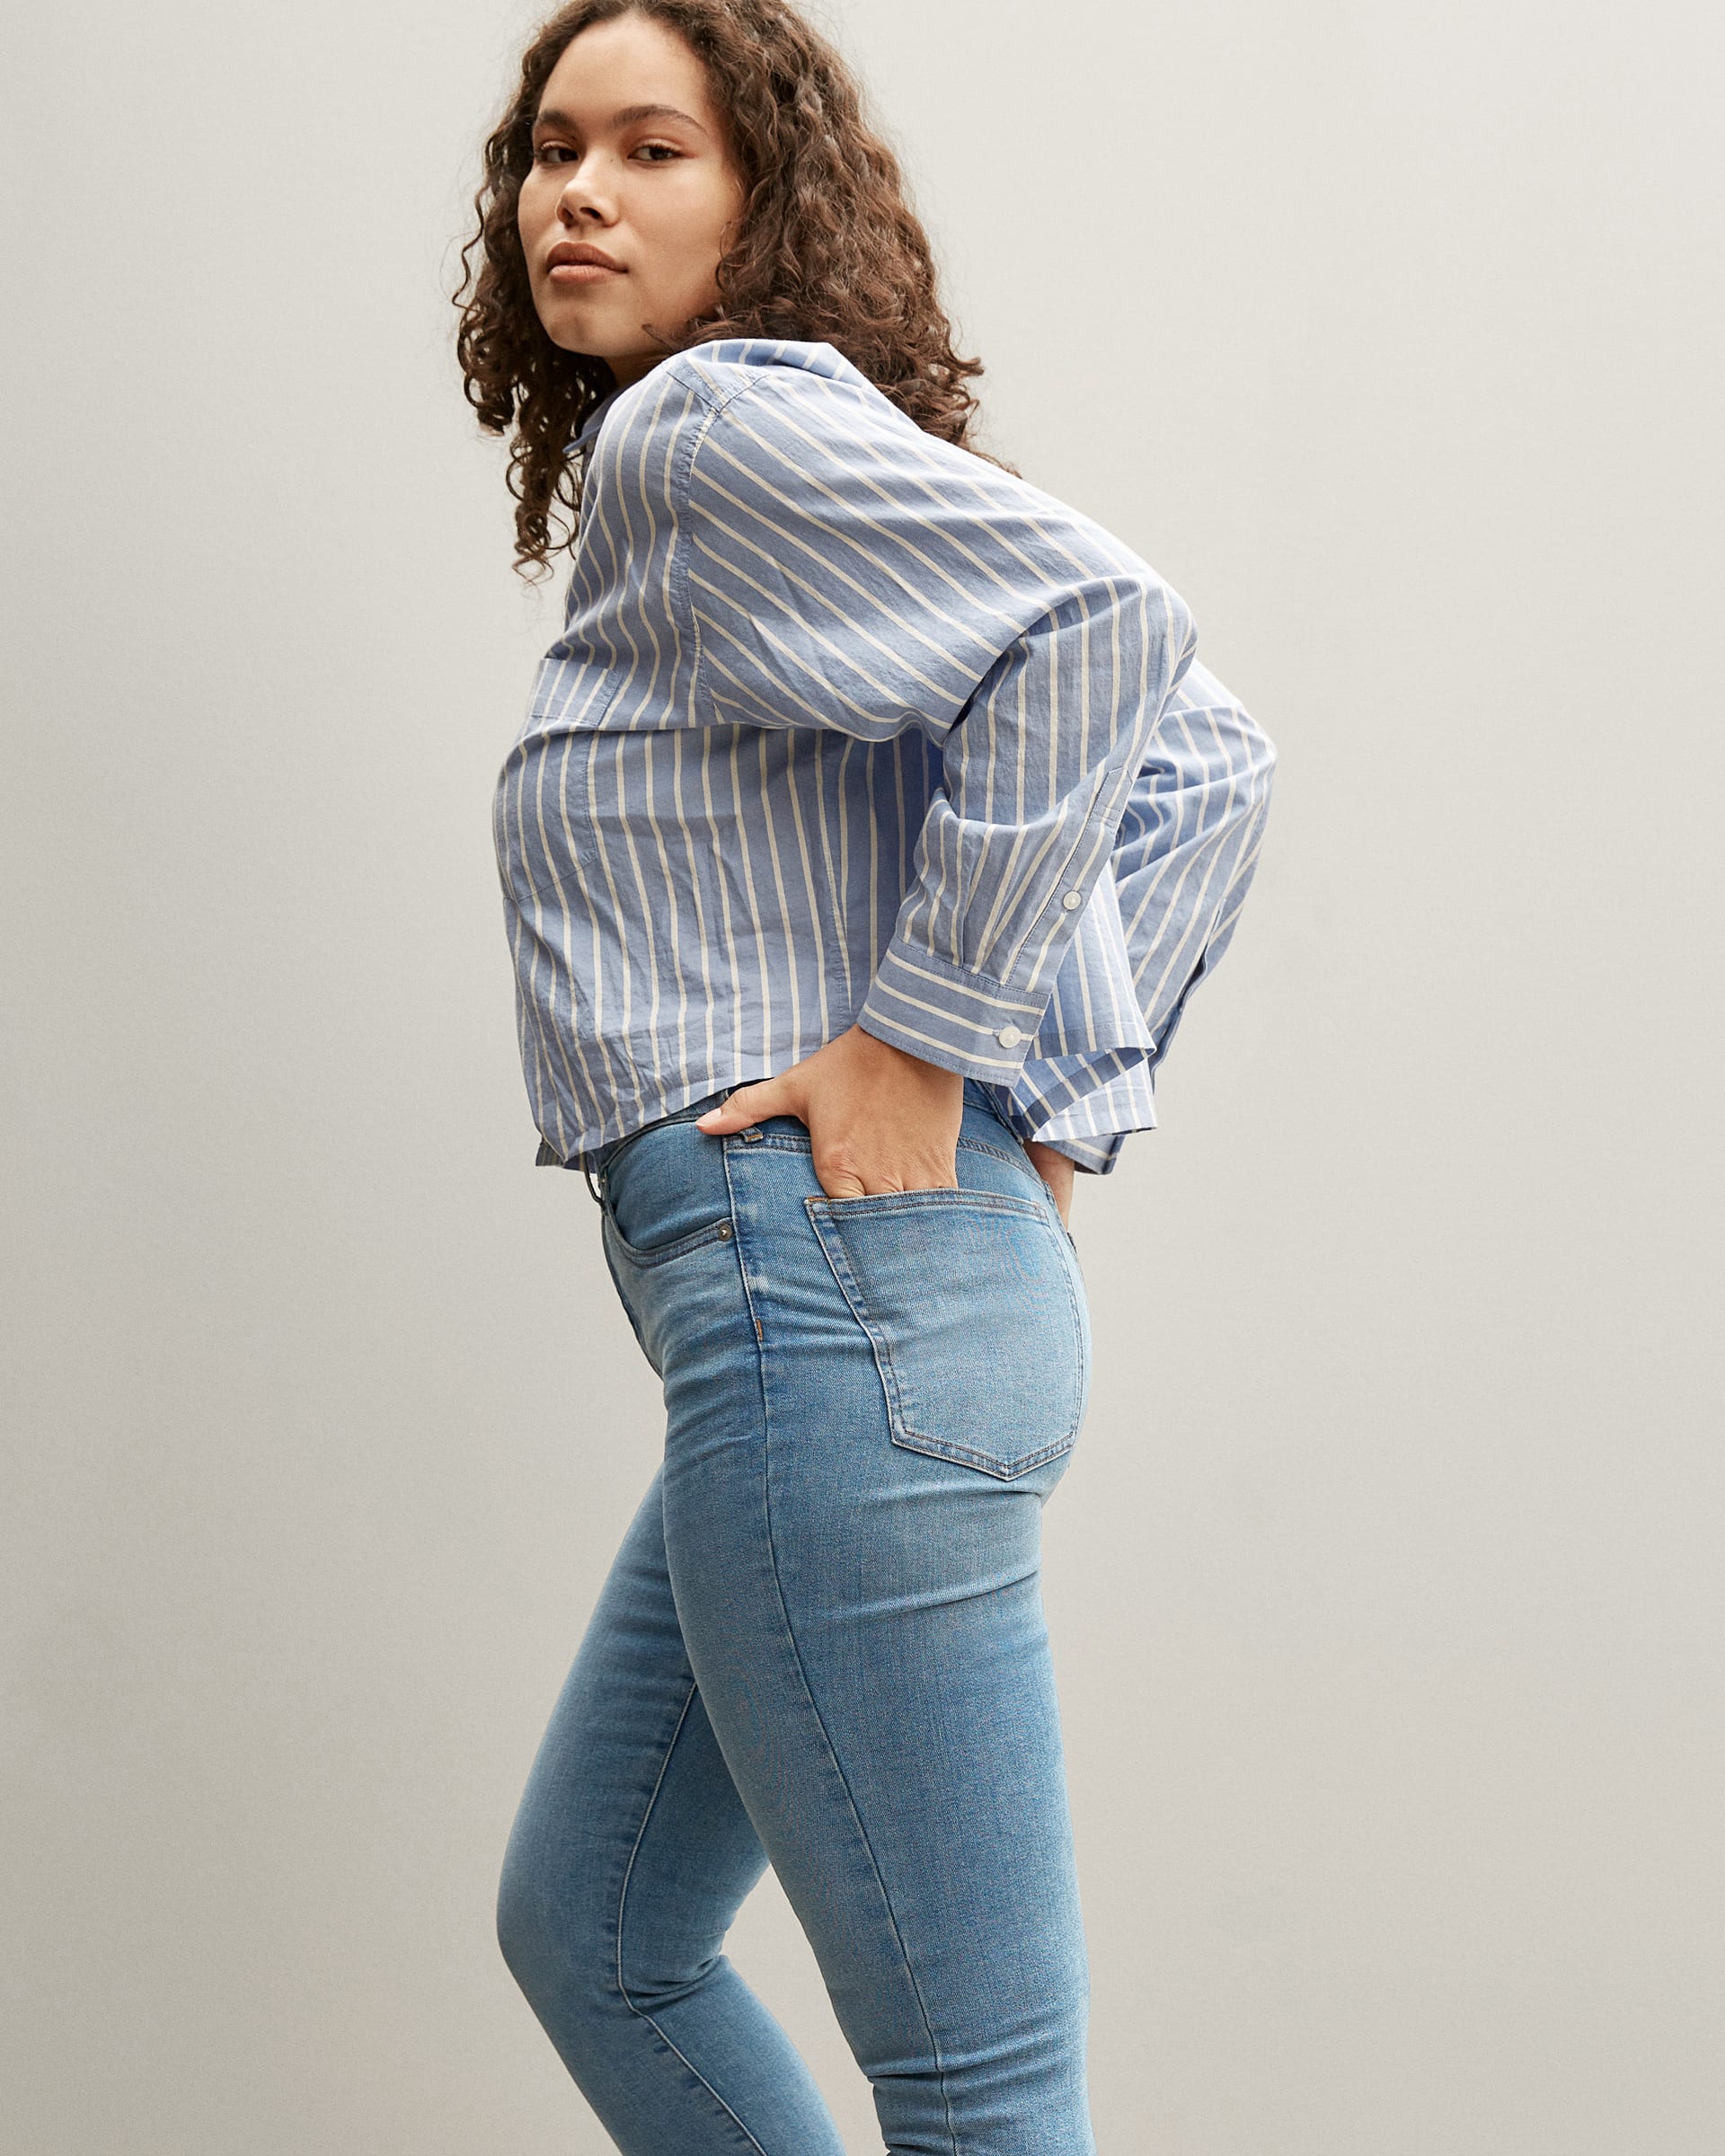 The Curvy Authentic Stretch High-Rise Skinny Jean Vintage Blue – Everlane